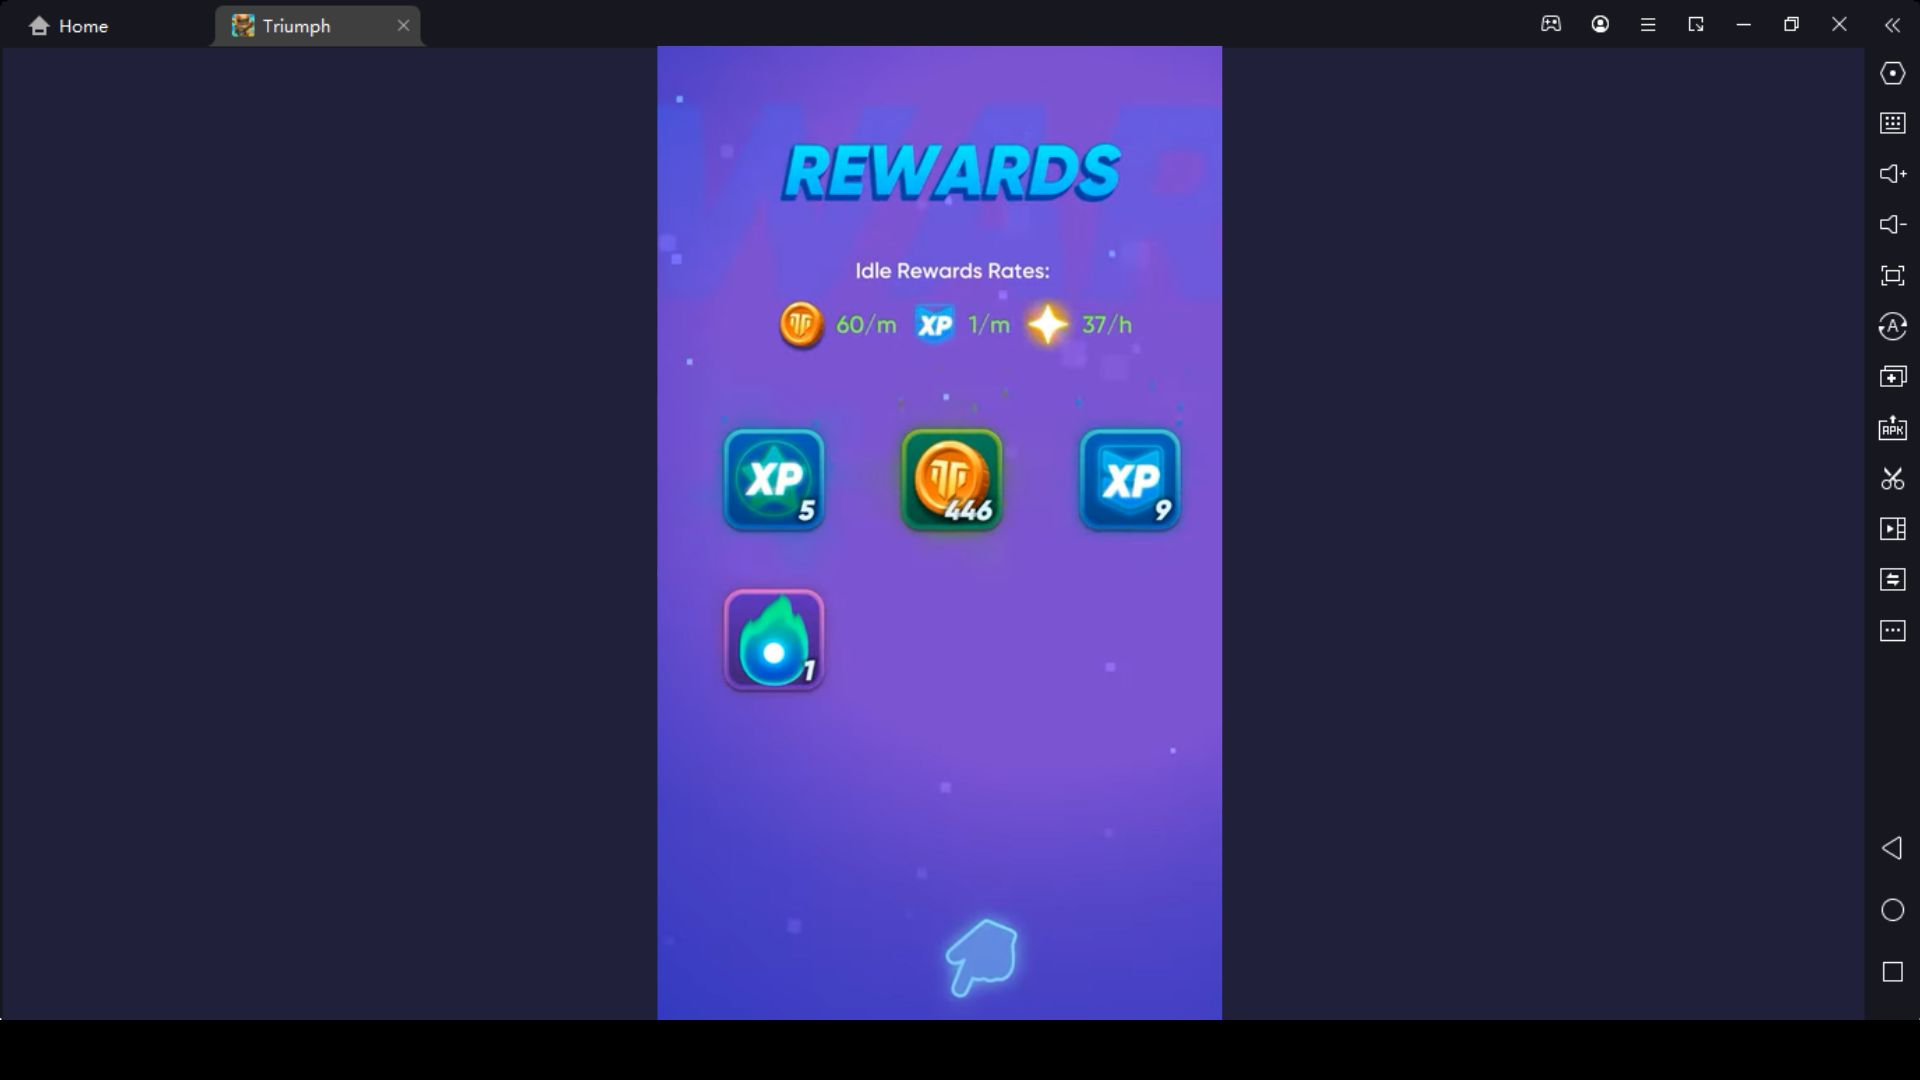 Win Missions for More Rewards